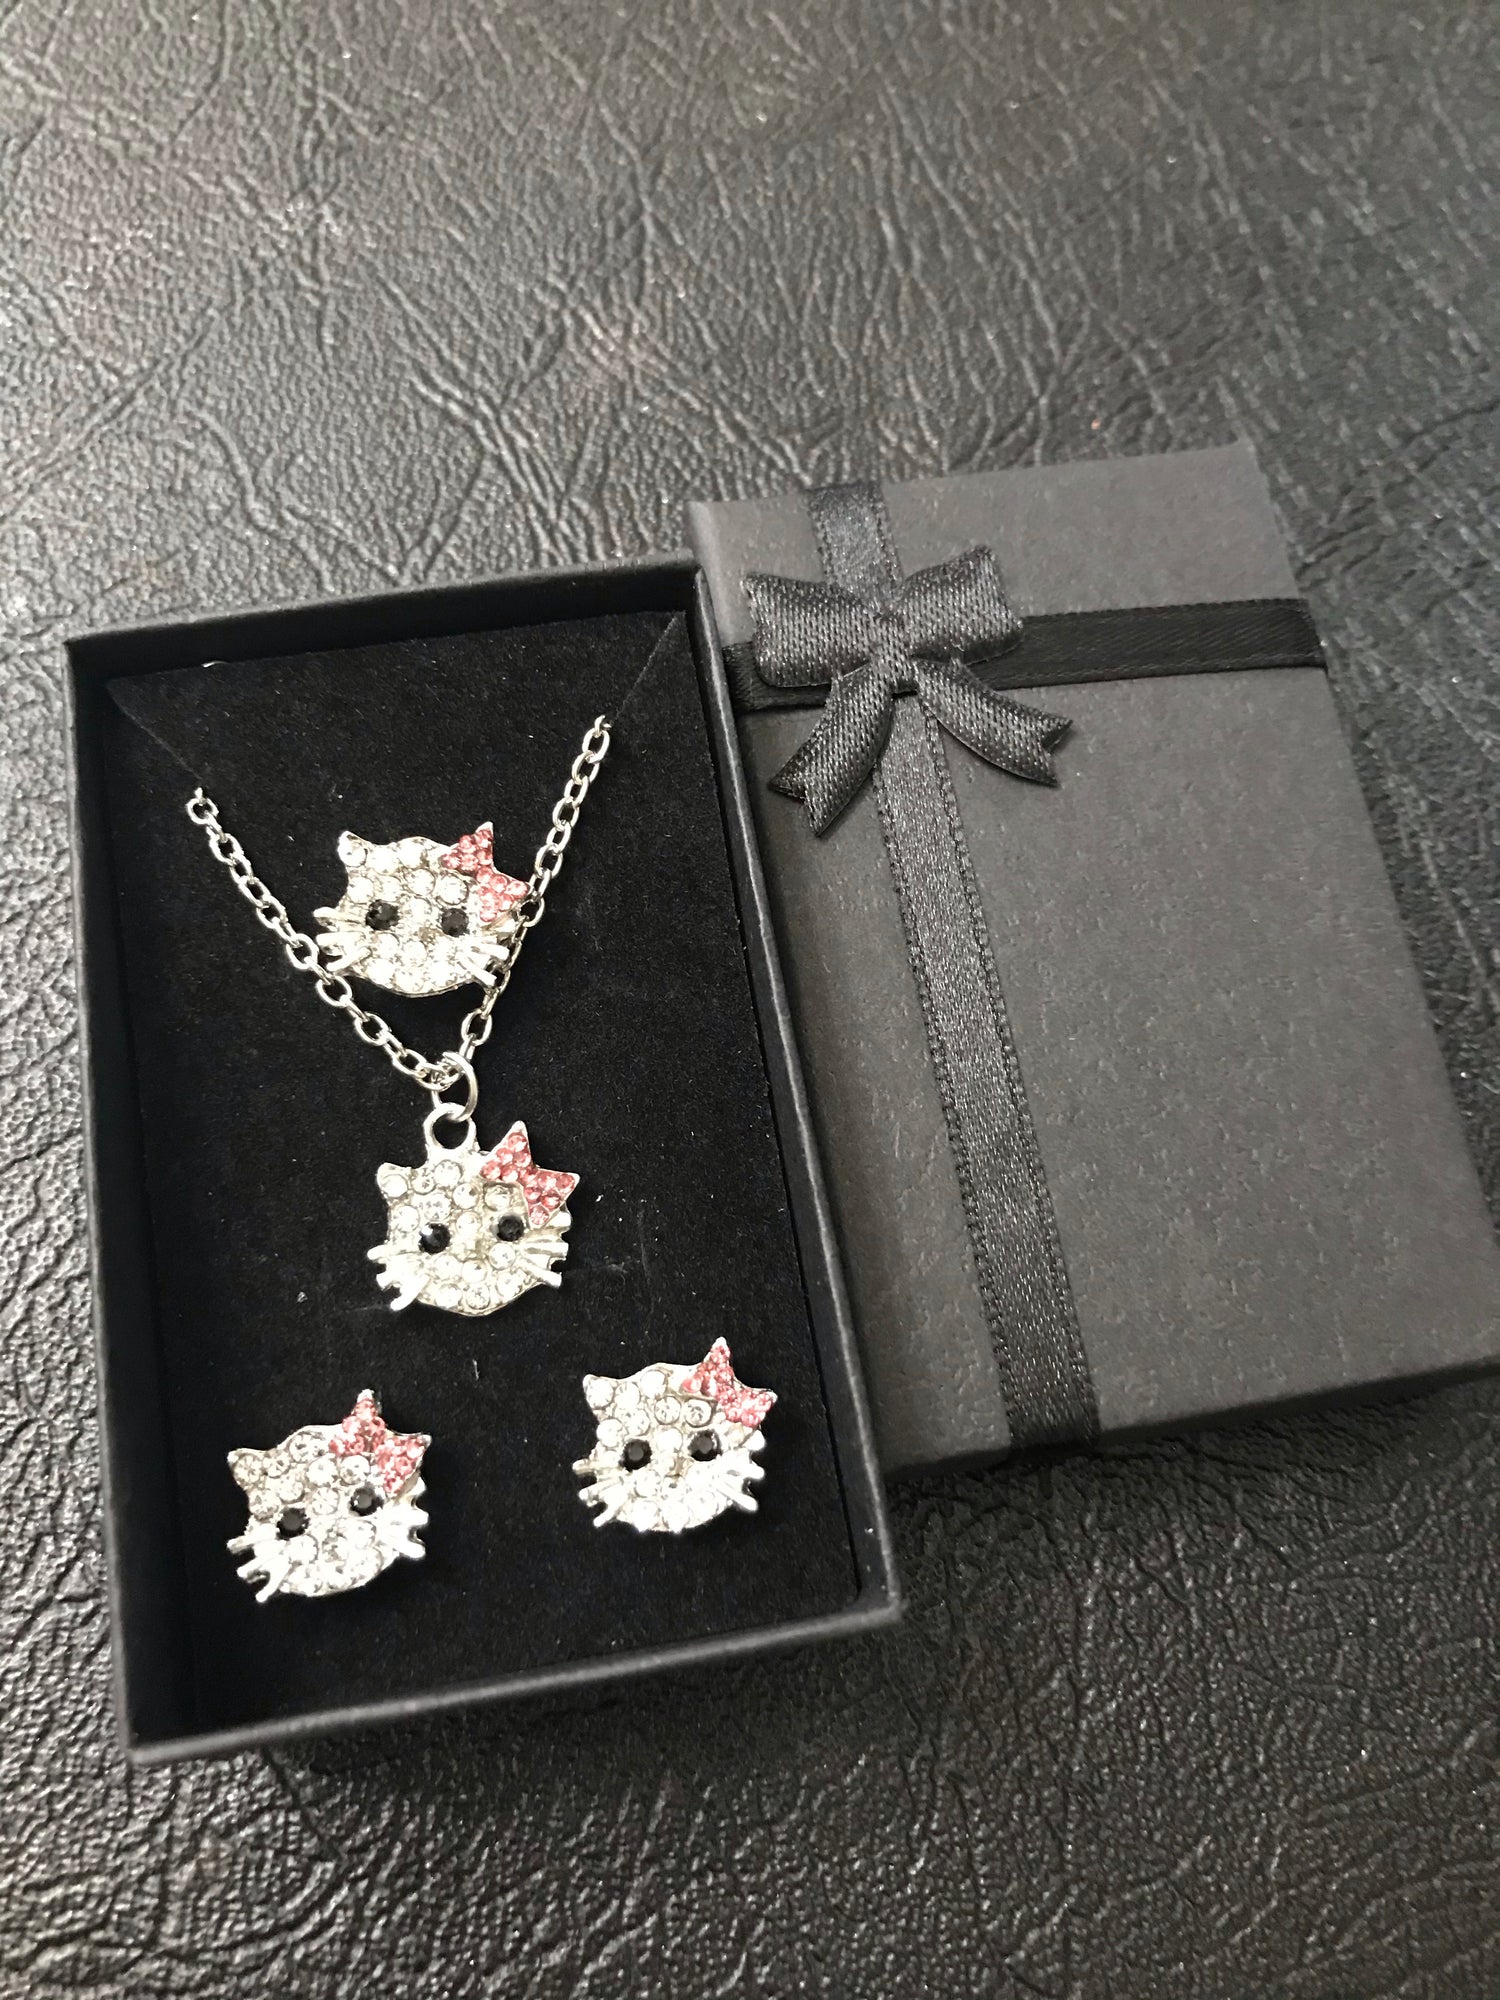 hello kitty necklace earrings ring complete jewelry set